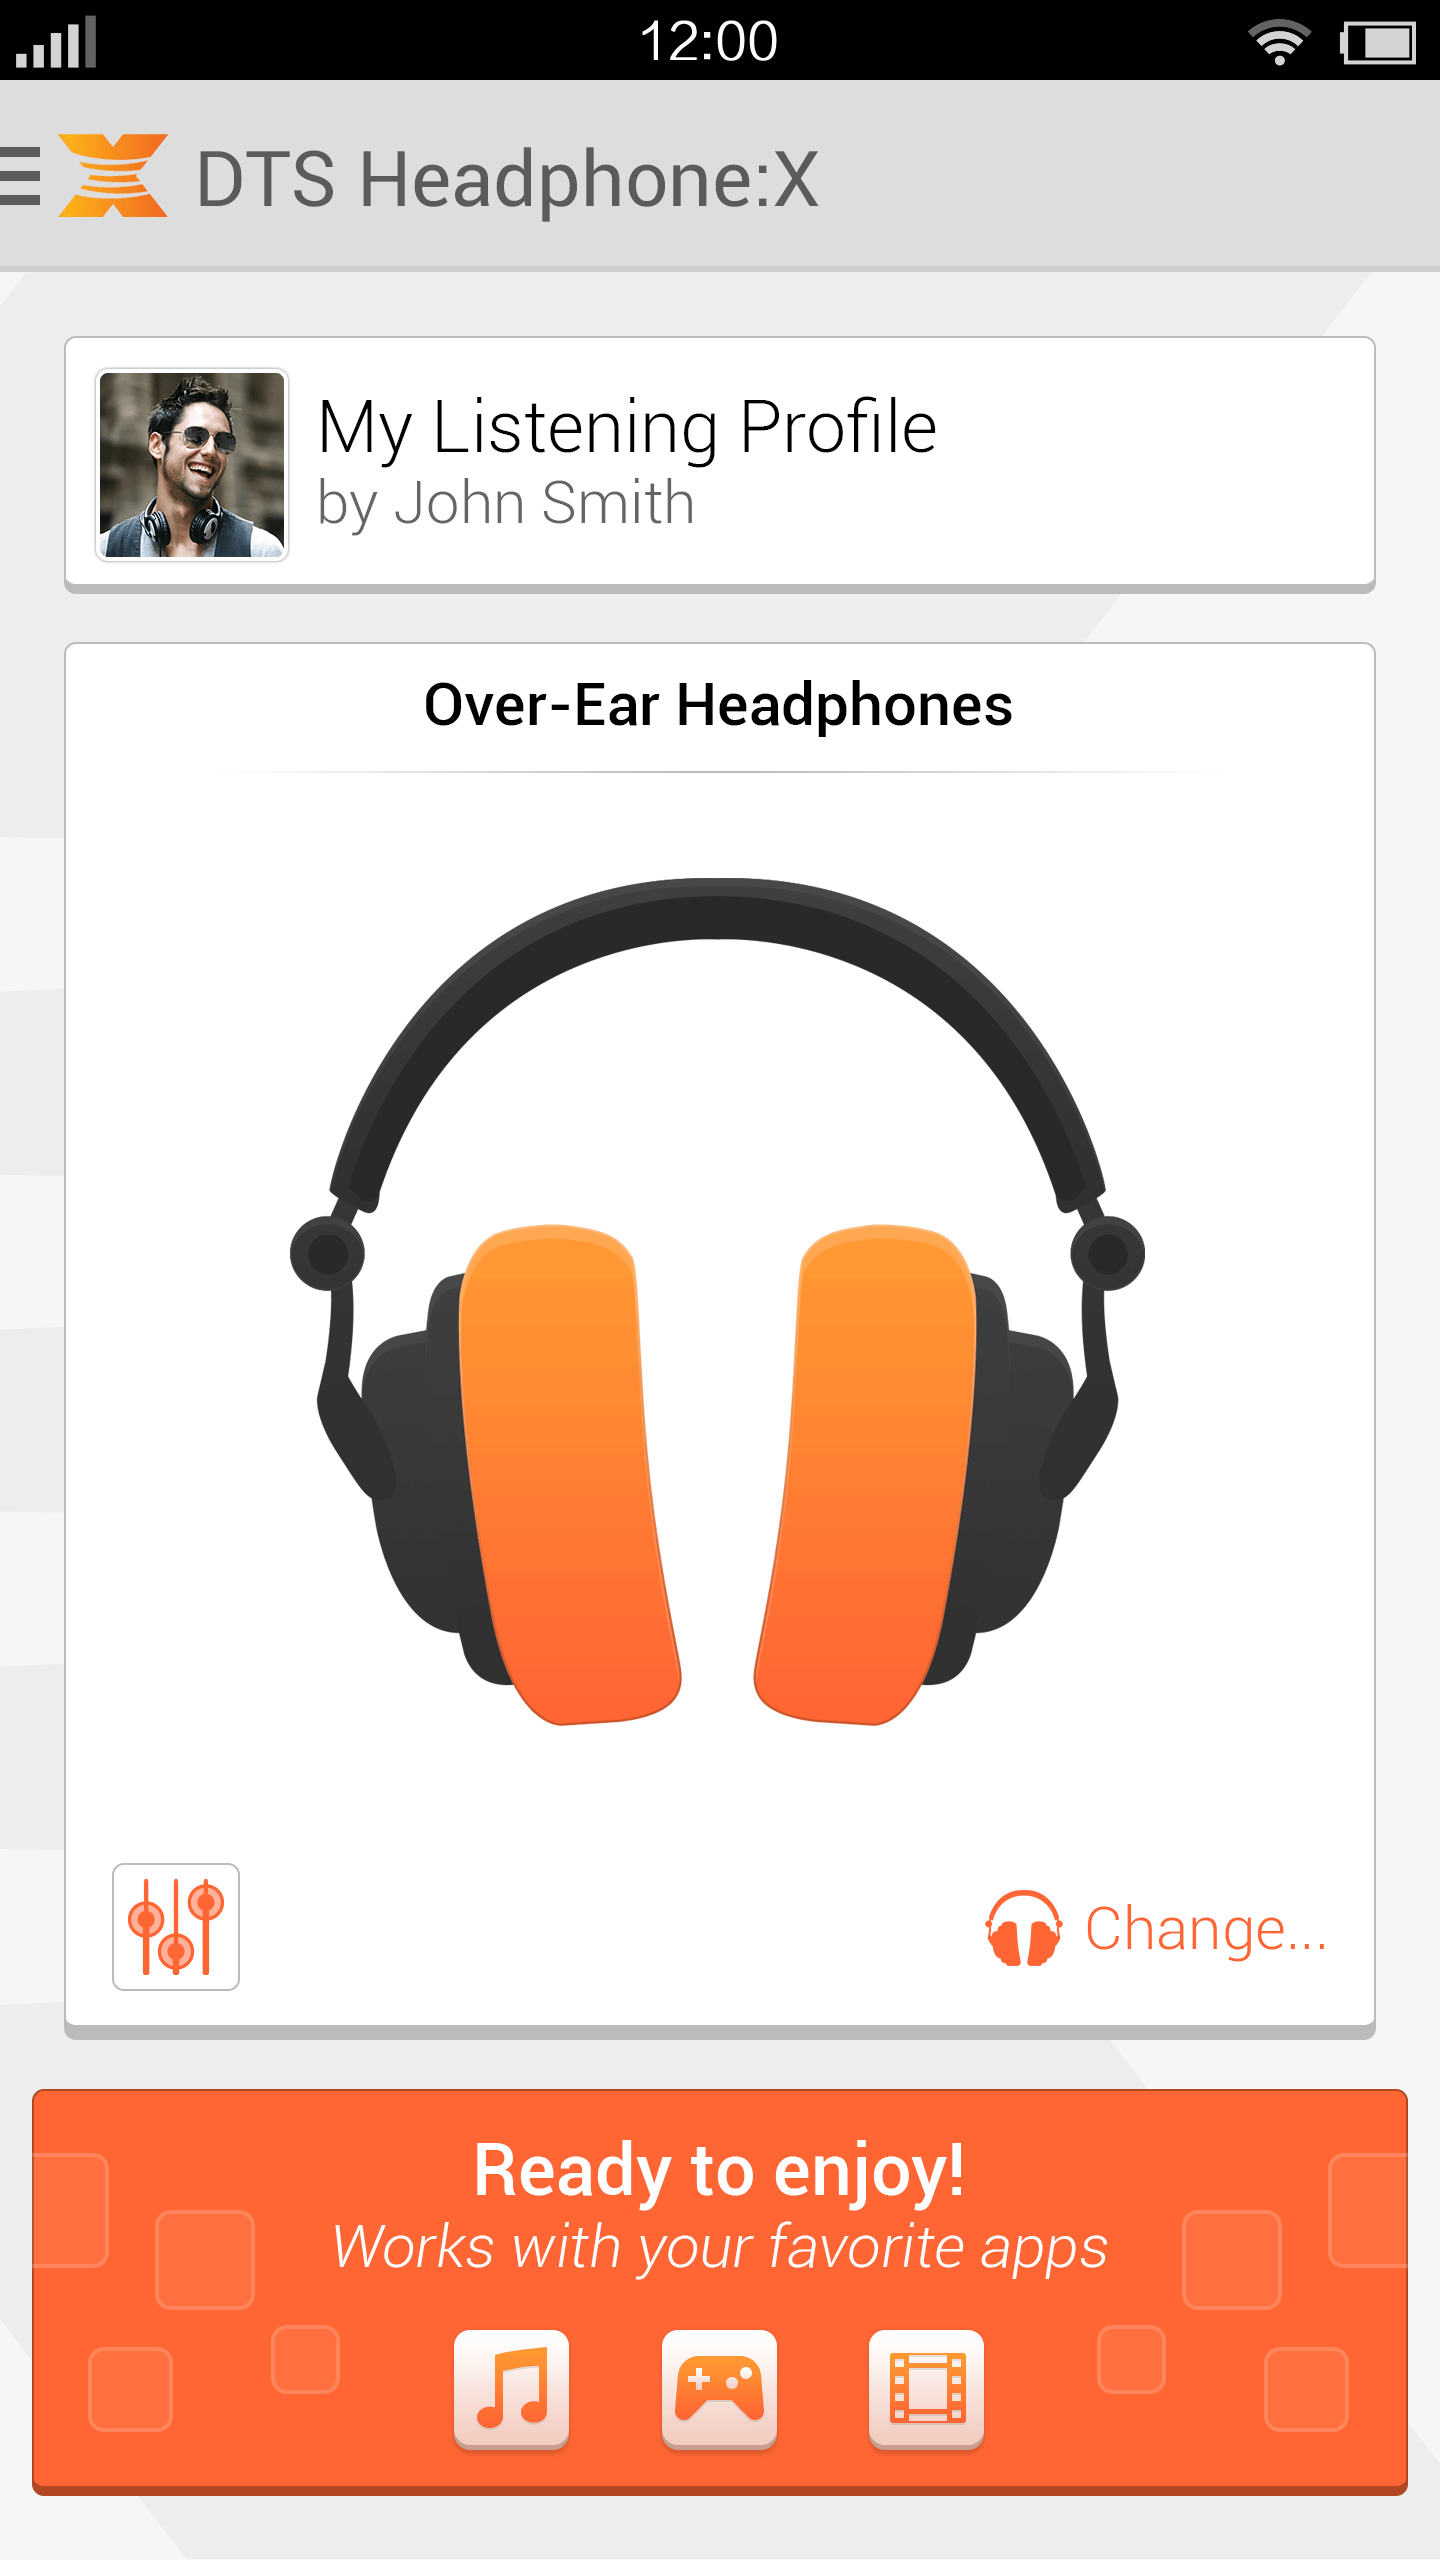 DTS Headphone:X Android Control Panel App